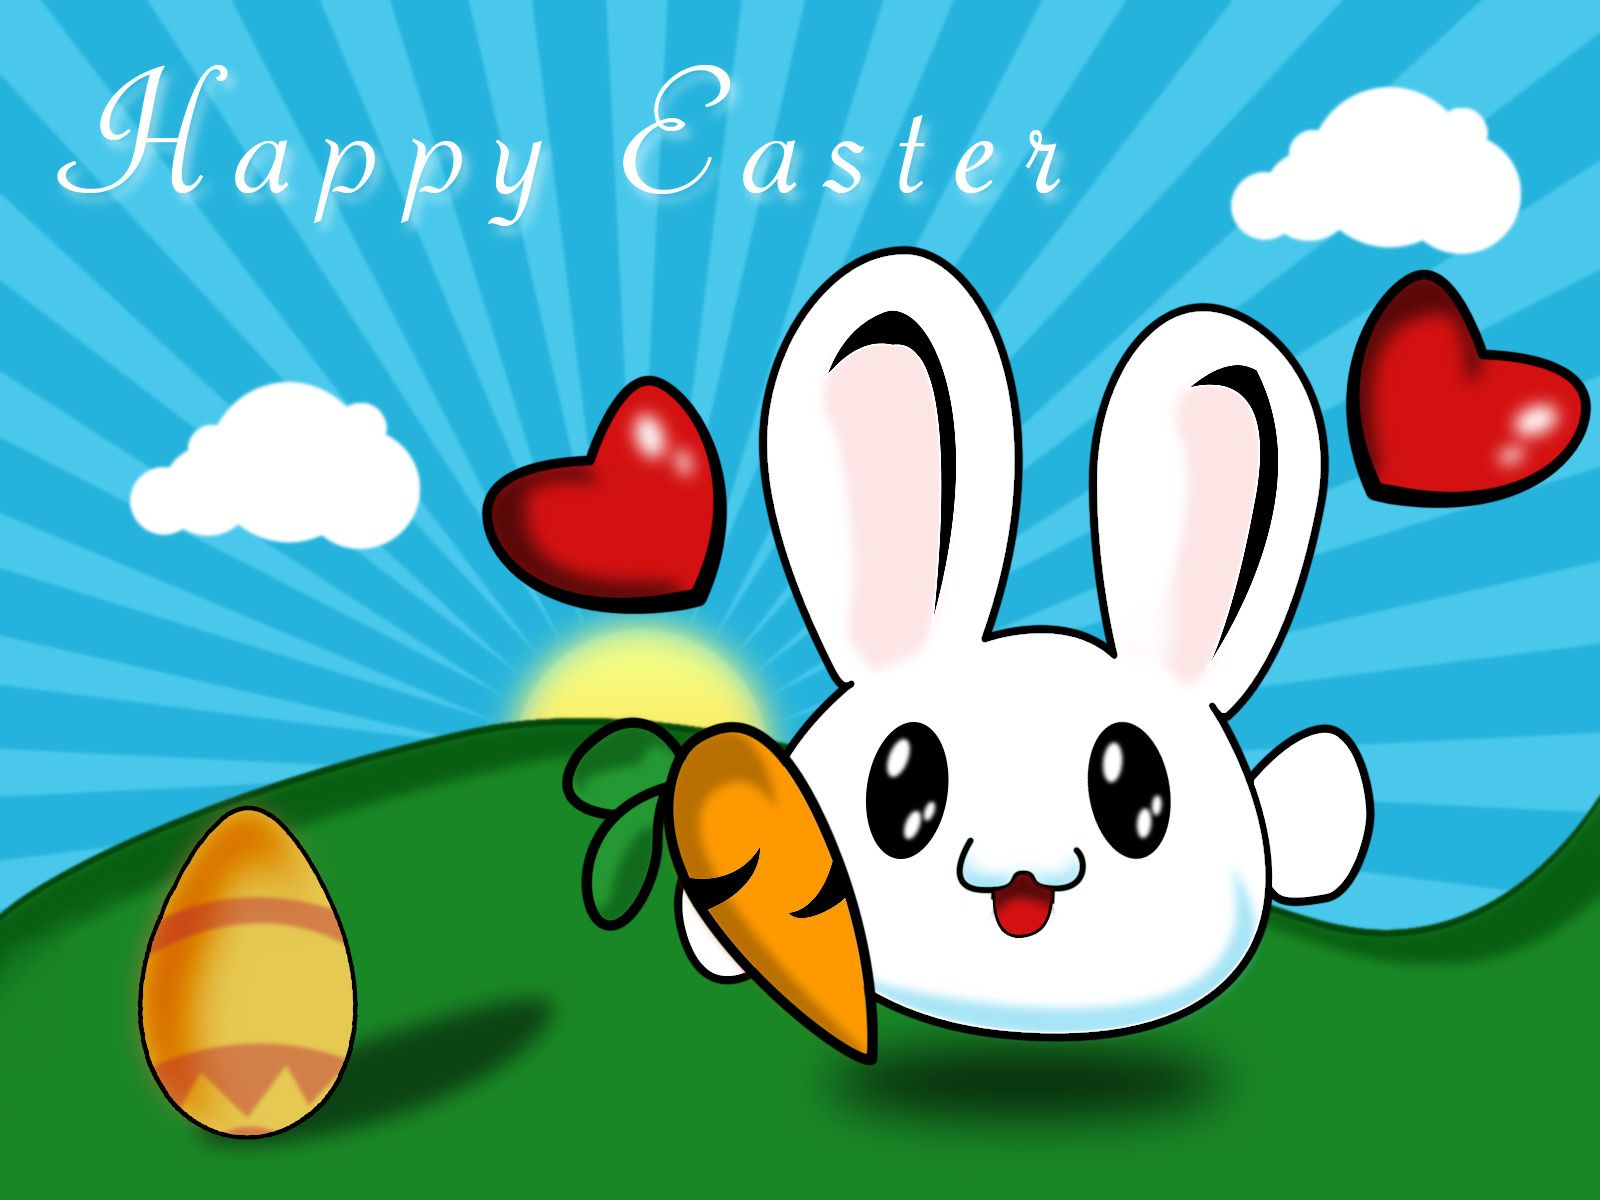 Happy Easter Bunny Picture Cartoon Wallpaper For Computer